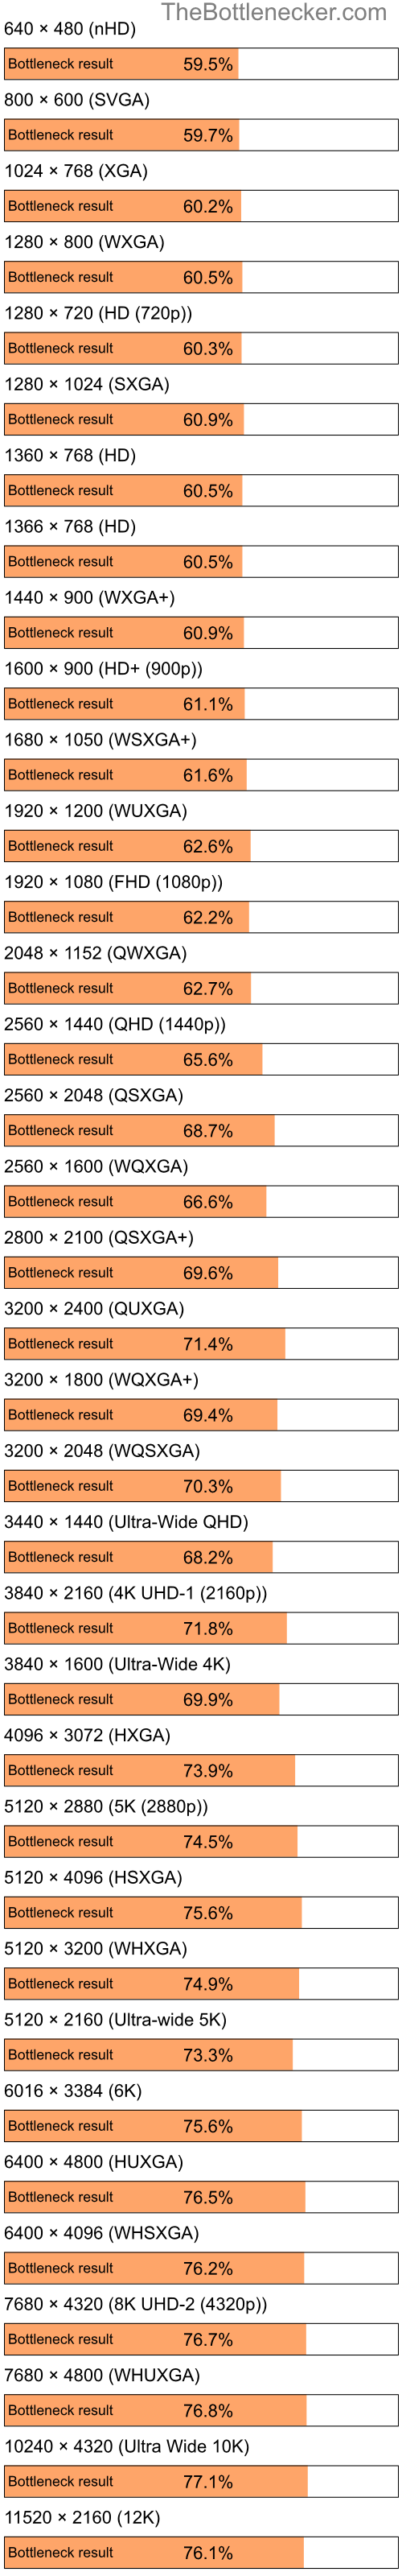 Bottleneck results by resolution for Intel Atom N270 and AMD Radeon X700 in Processor Intense Tasks